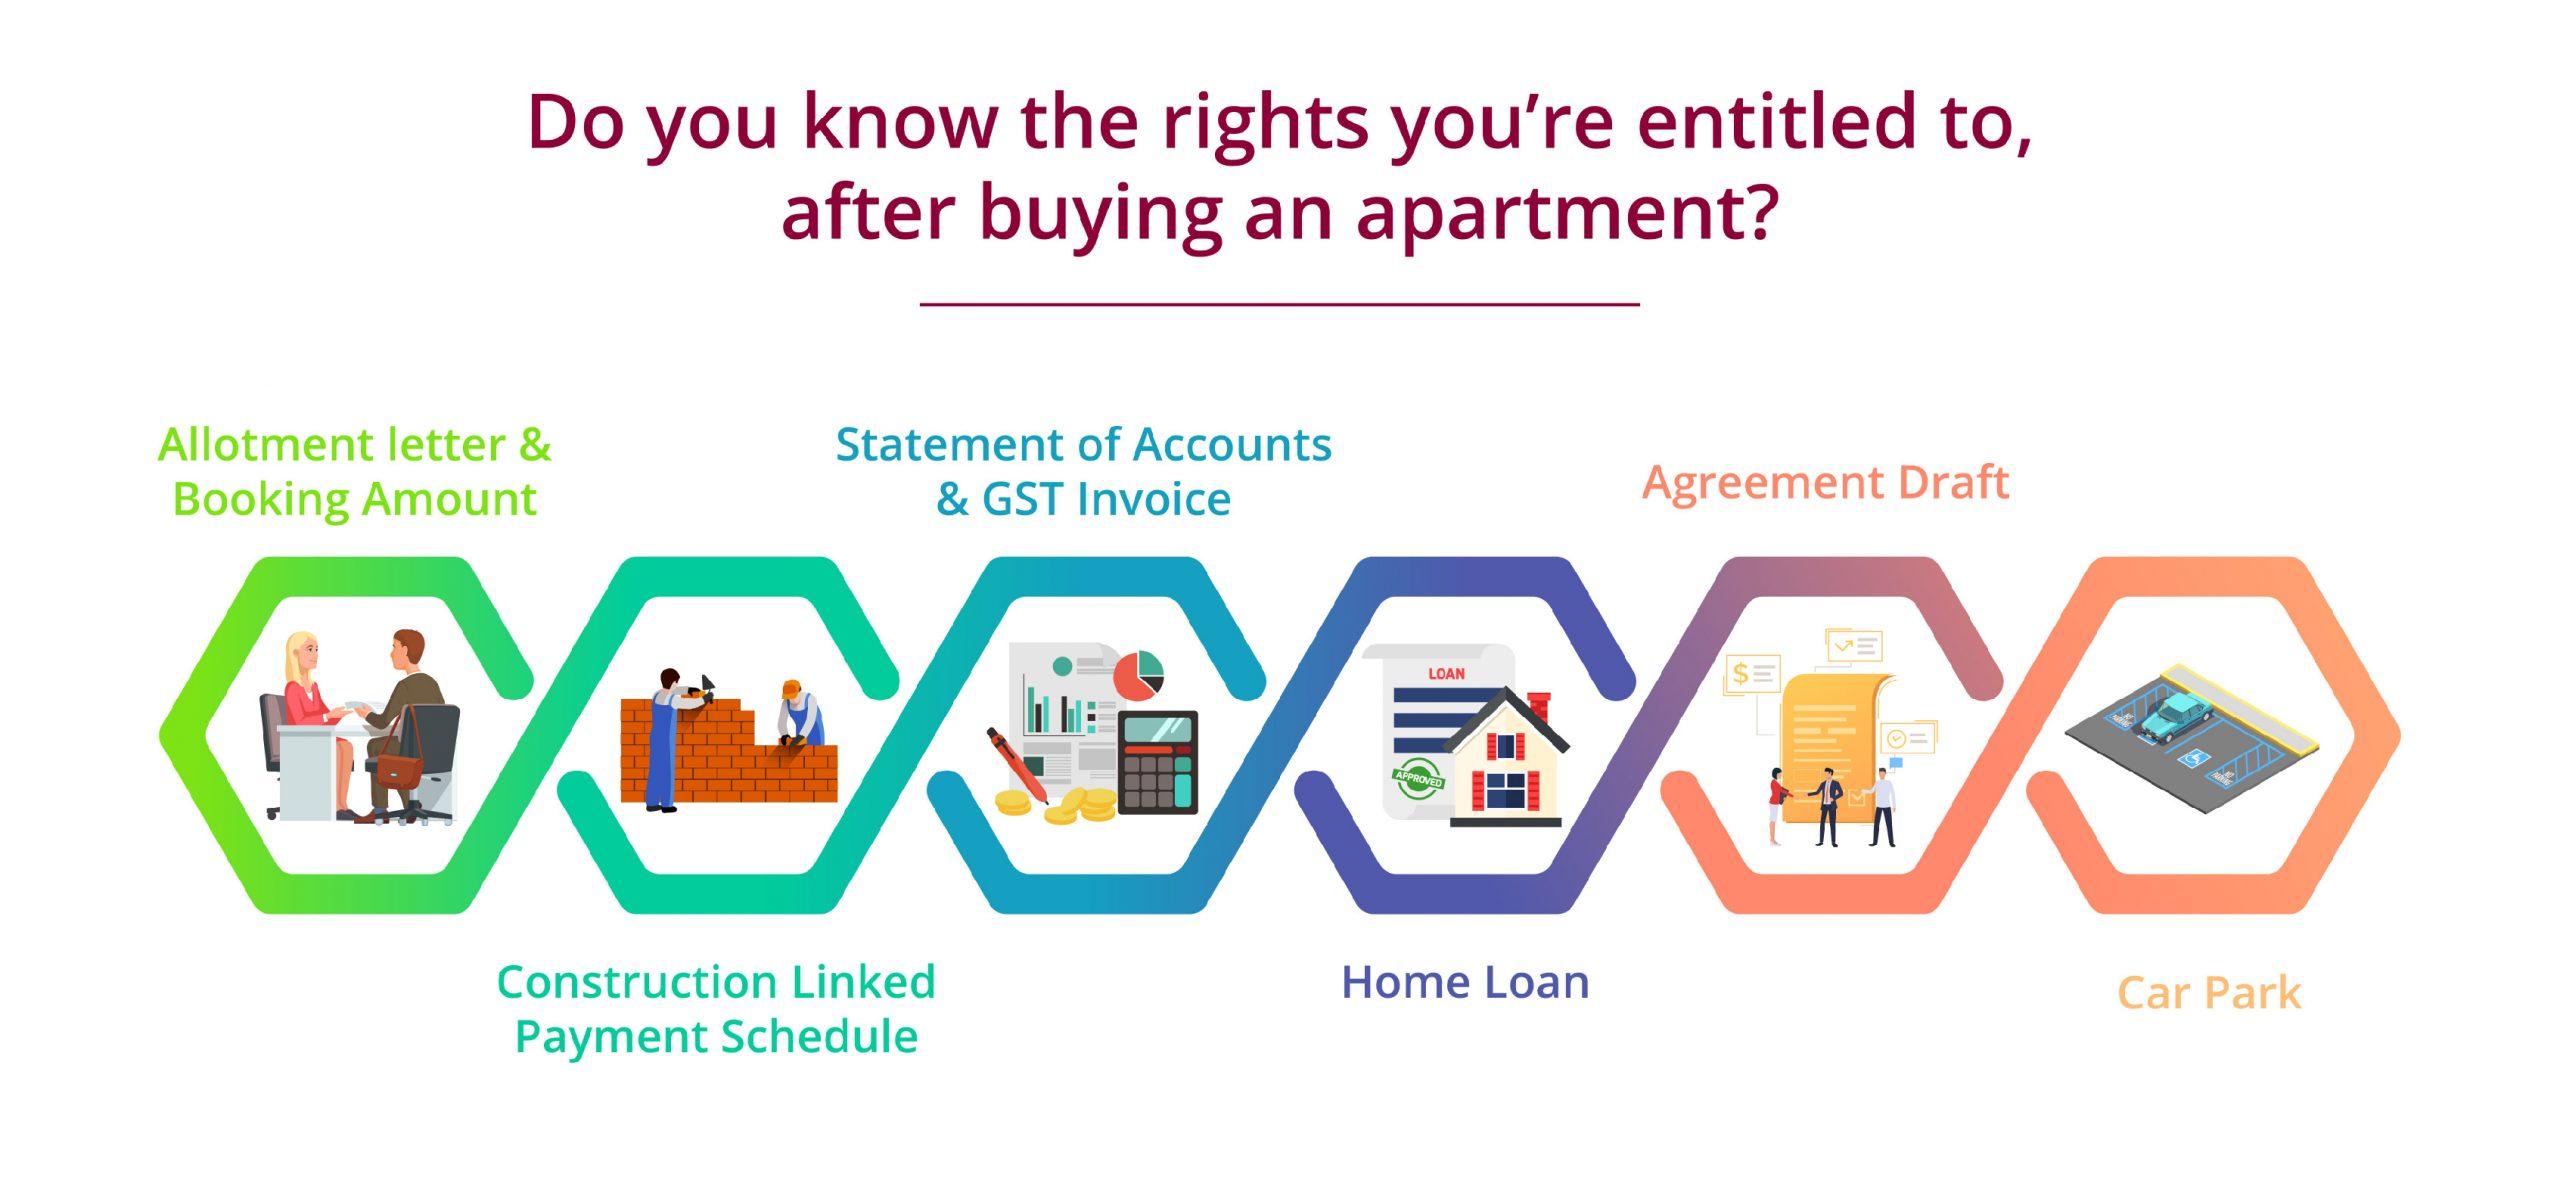 Do you know the rights you’re entitled to, after buying an apartment?